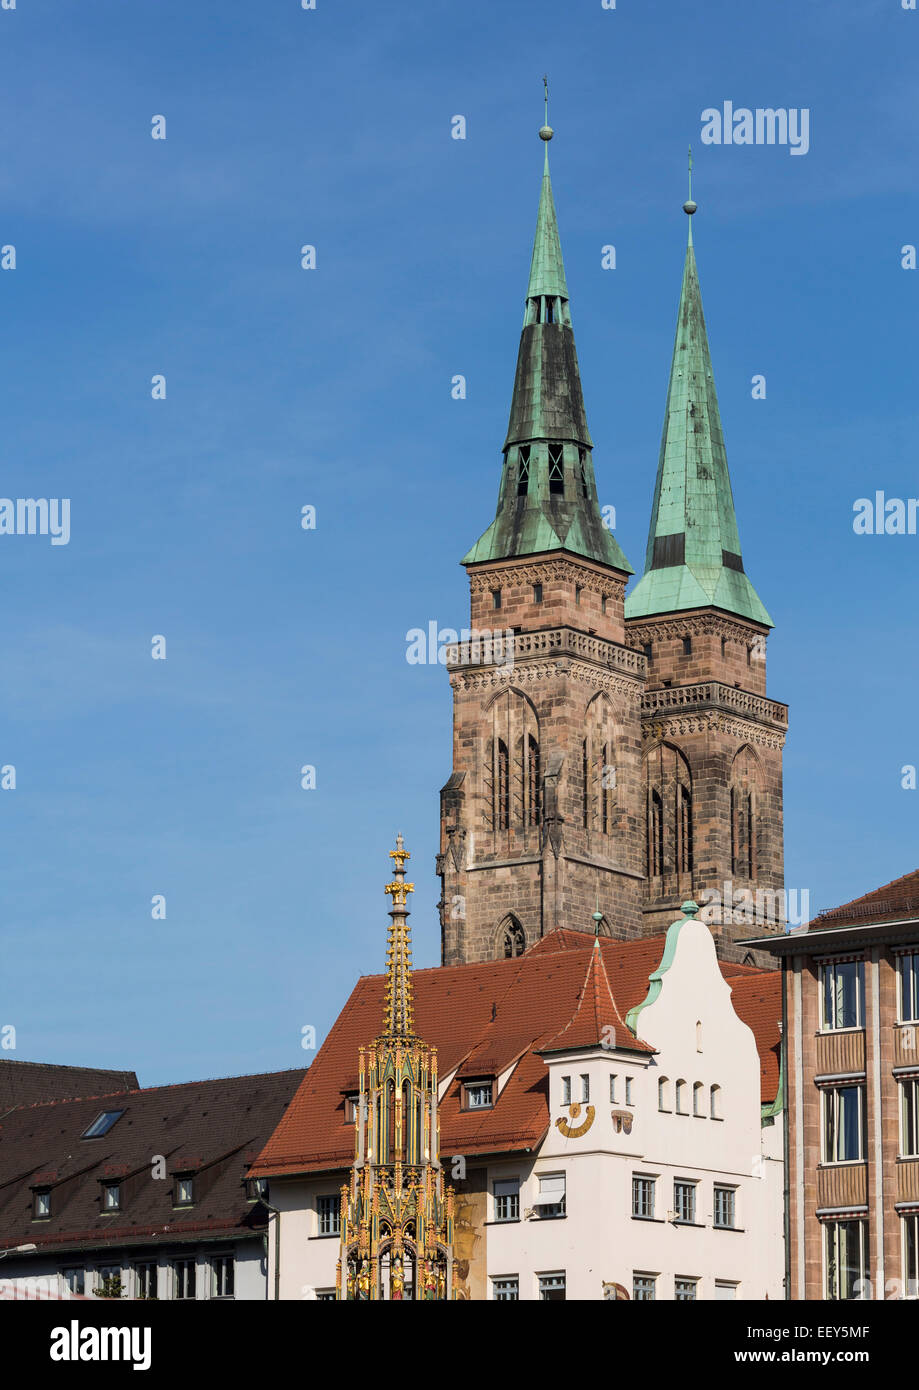 The Schoner Brunnen fountain with St Sebald Church behind in Nuremberg, Germany Stock Photo